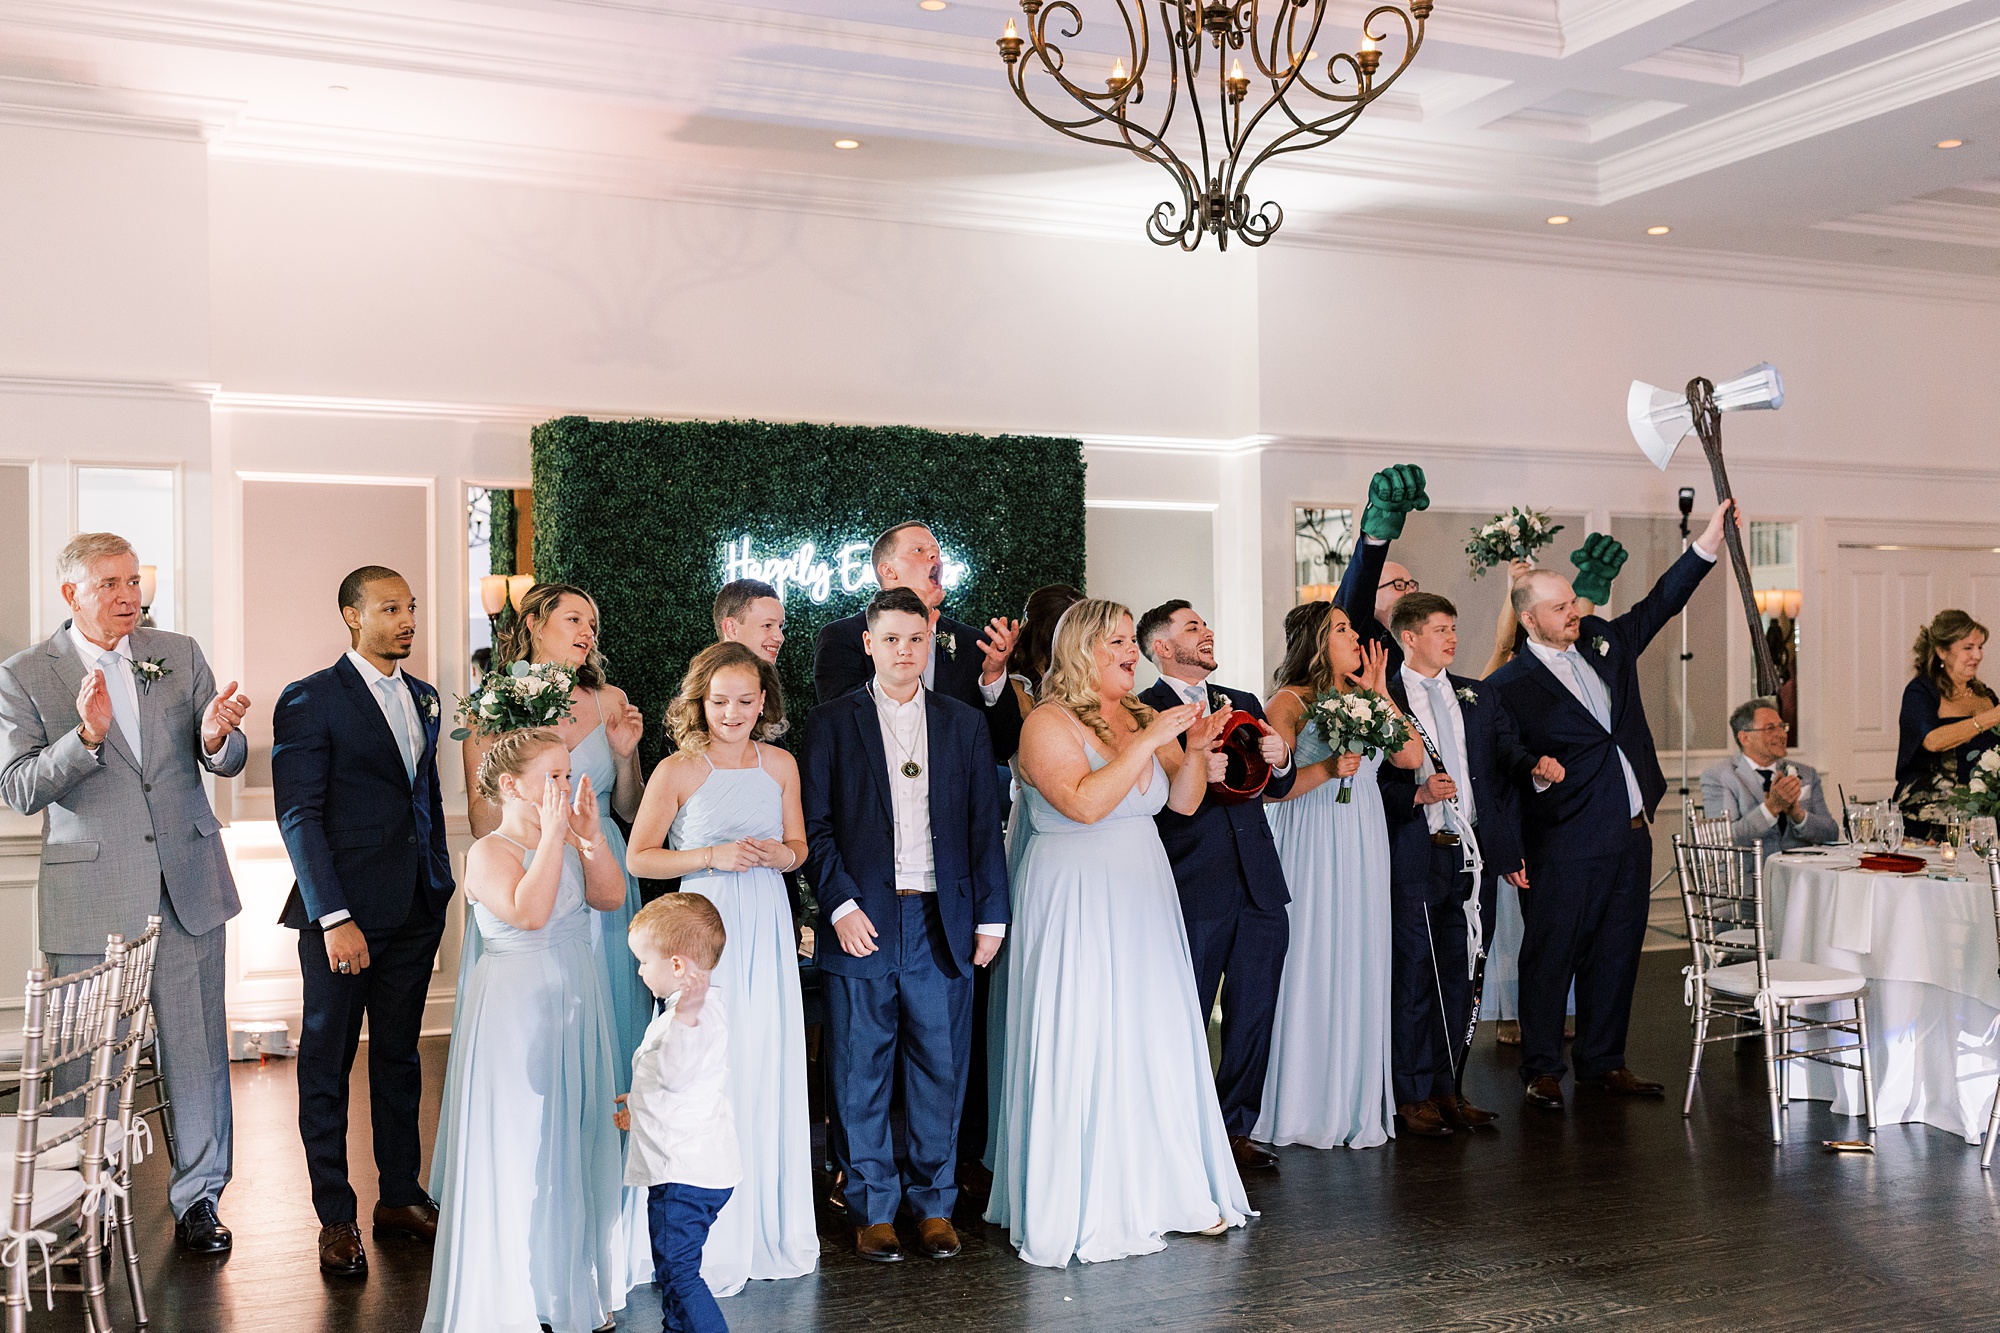 wedding party claps for bride and groom